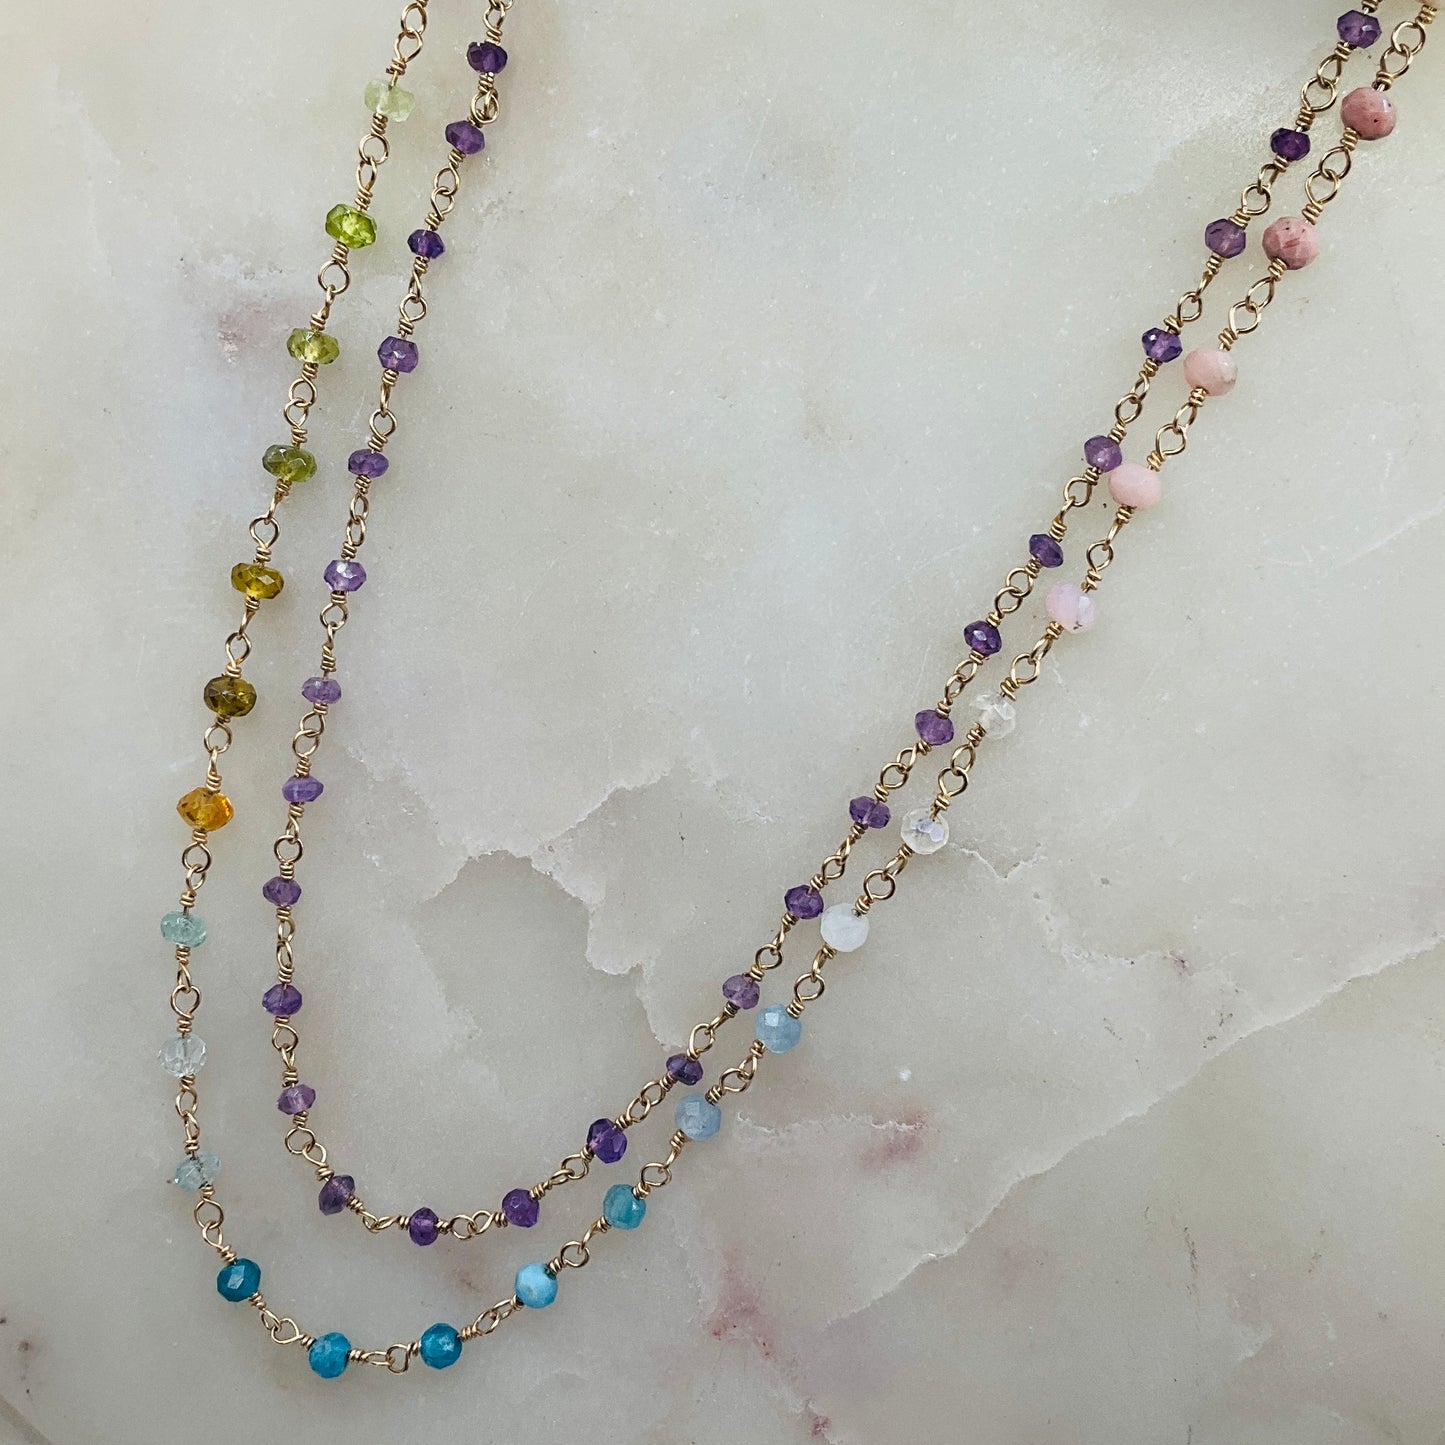 Gemstone Rosary Necklace ~ Small  Amethyst